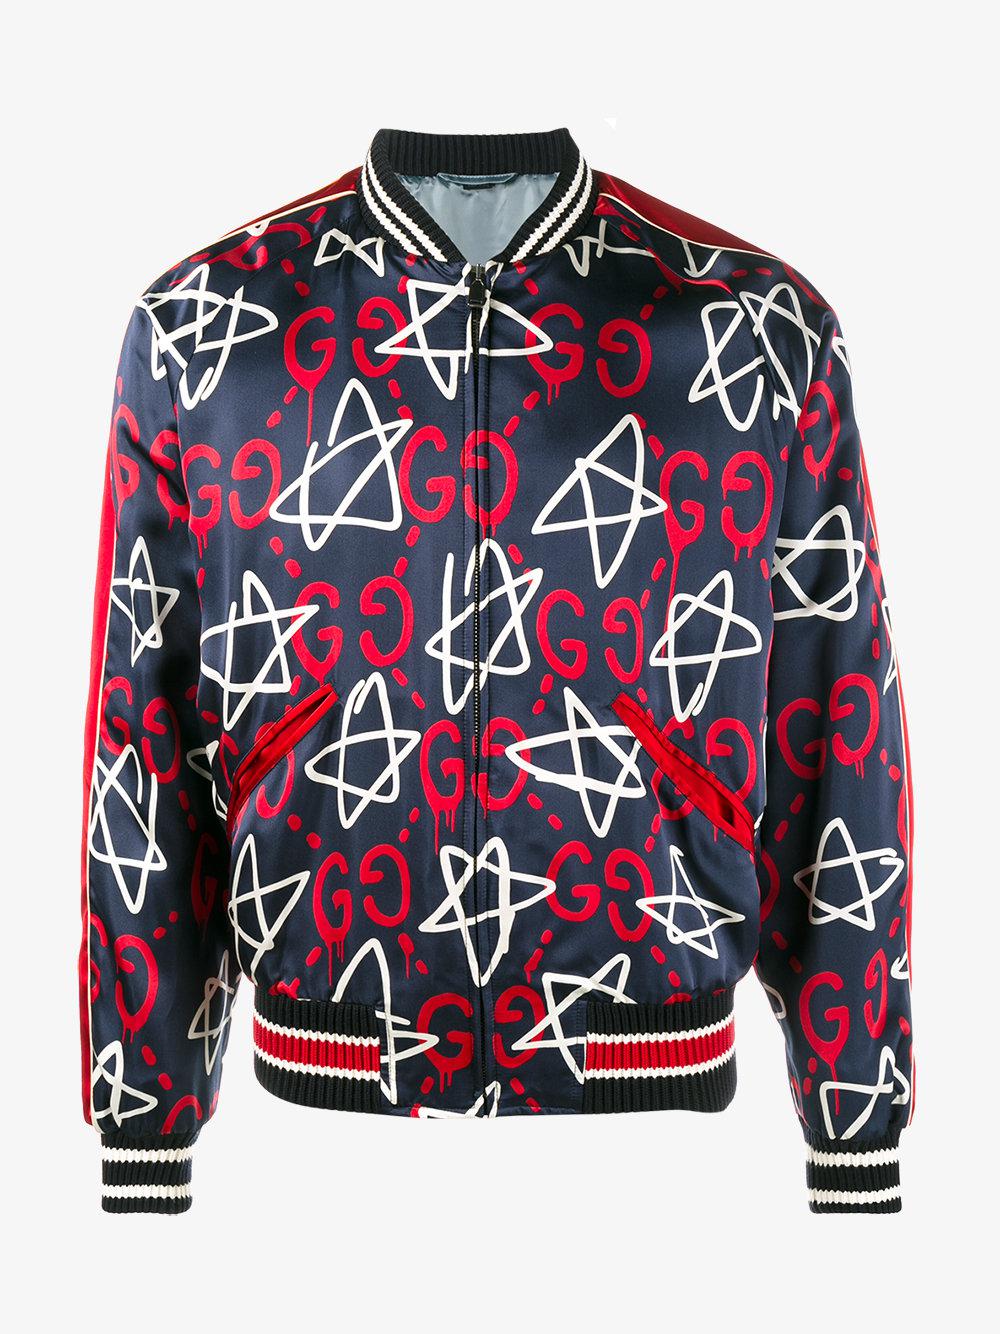 Lyst - Gucci Ghost Star Duchesse Bomber Jacket in Blue for Men